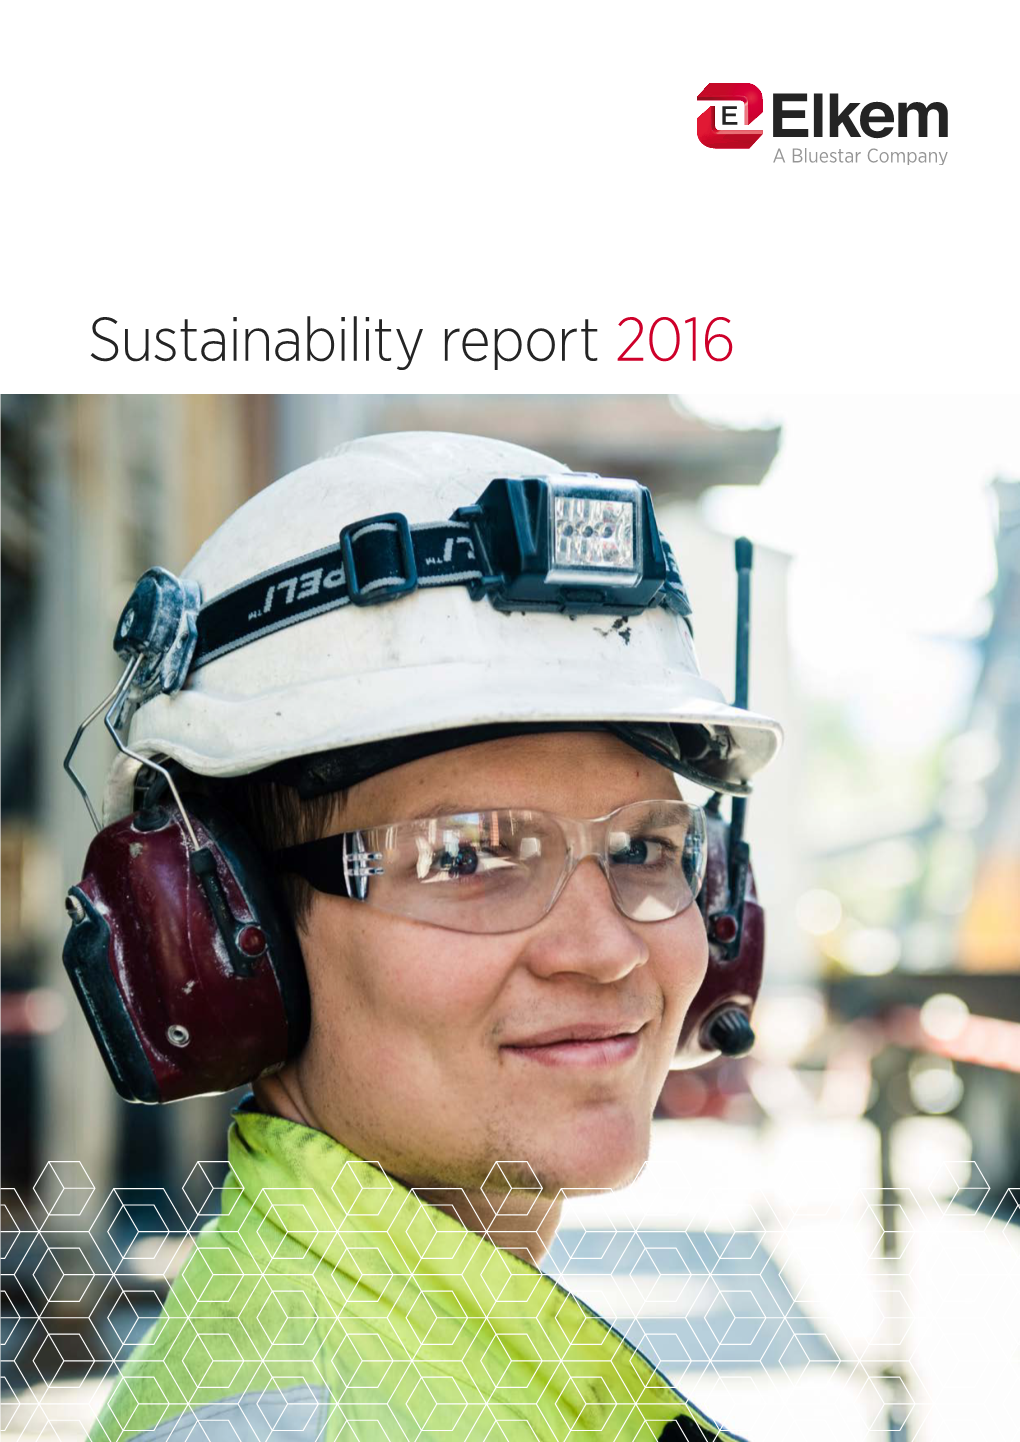 Sustainability Report 2016 Contents